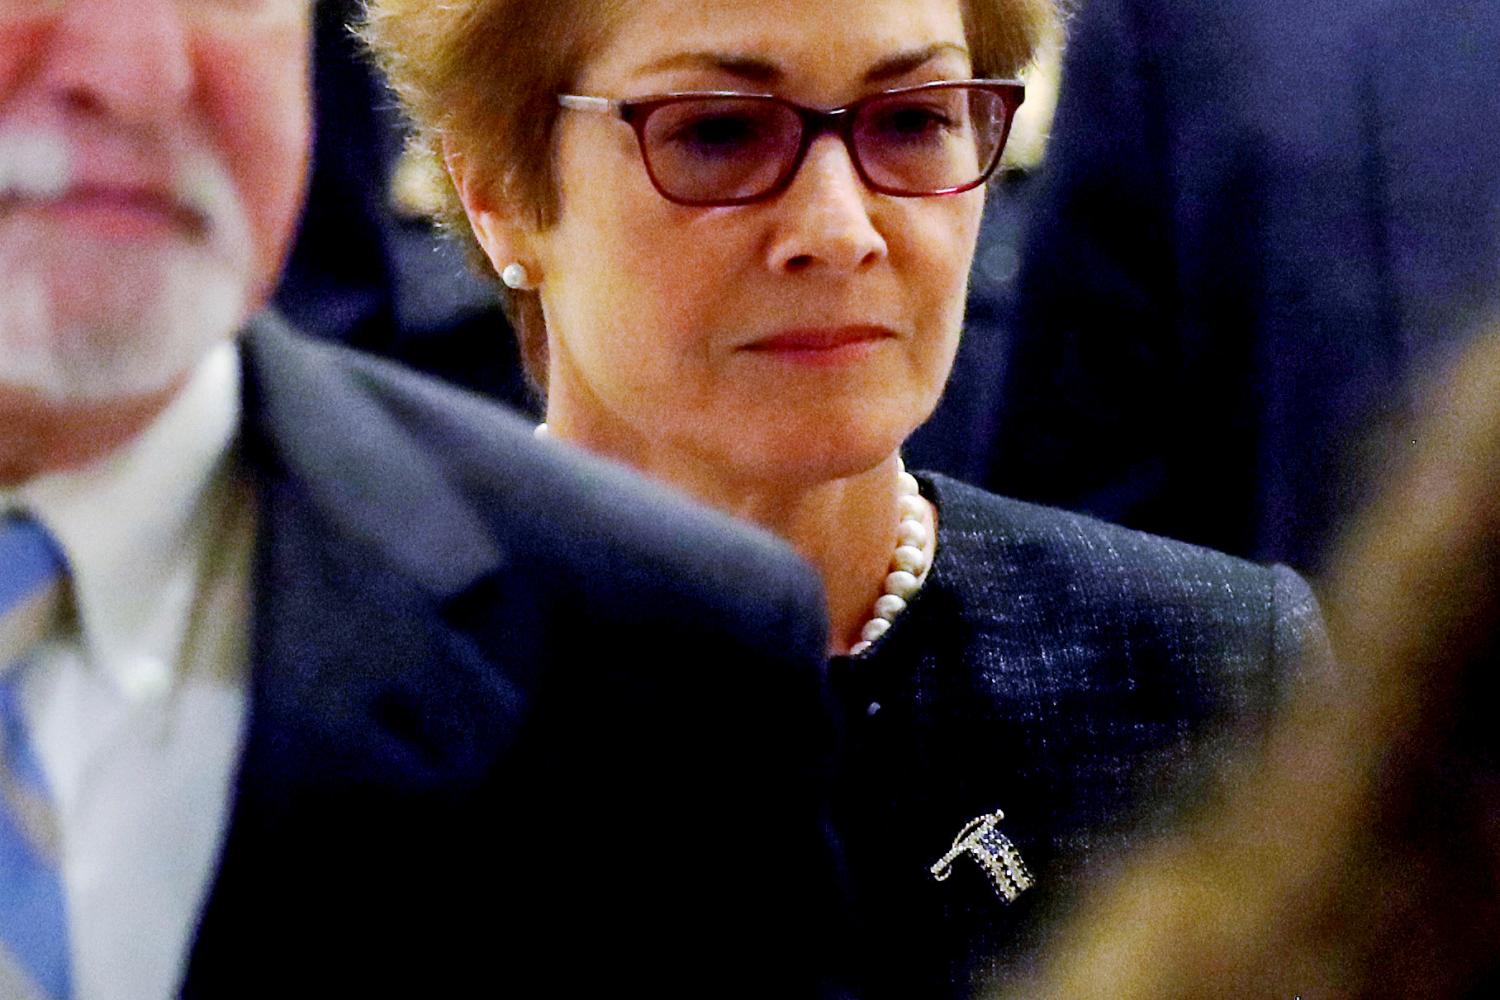 Former U.S. ambassador to Ukraine Marie Yovanovitch arrives to testify in the U.S. House of Representatives impeachment inquiry into U.S. President Trump on Capitol Hill in Washington, U.S., October 11, 2019. REUTERS/Jonathan Ernst     TPX IMAGES OF THE DAY - RC1867D61B10